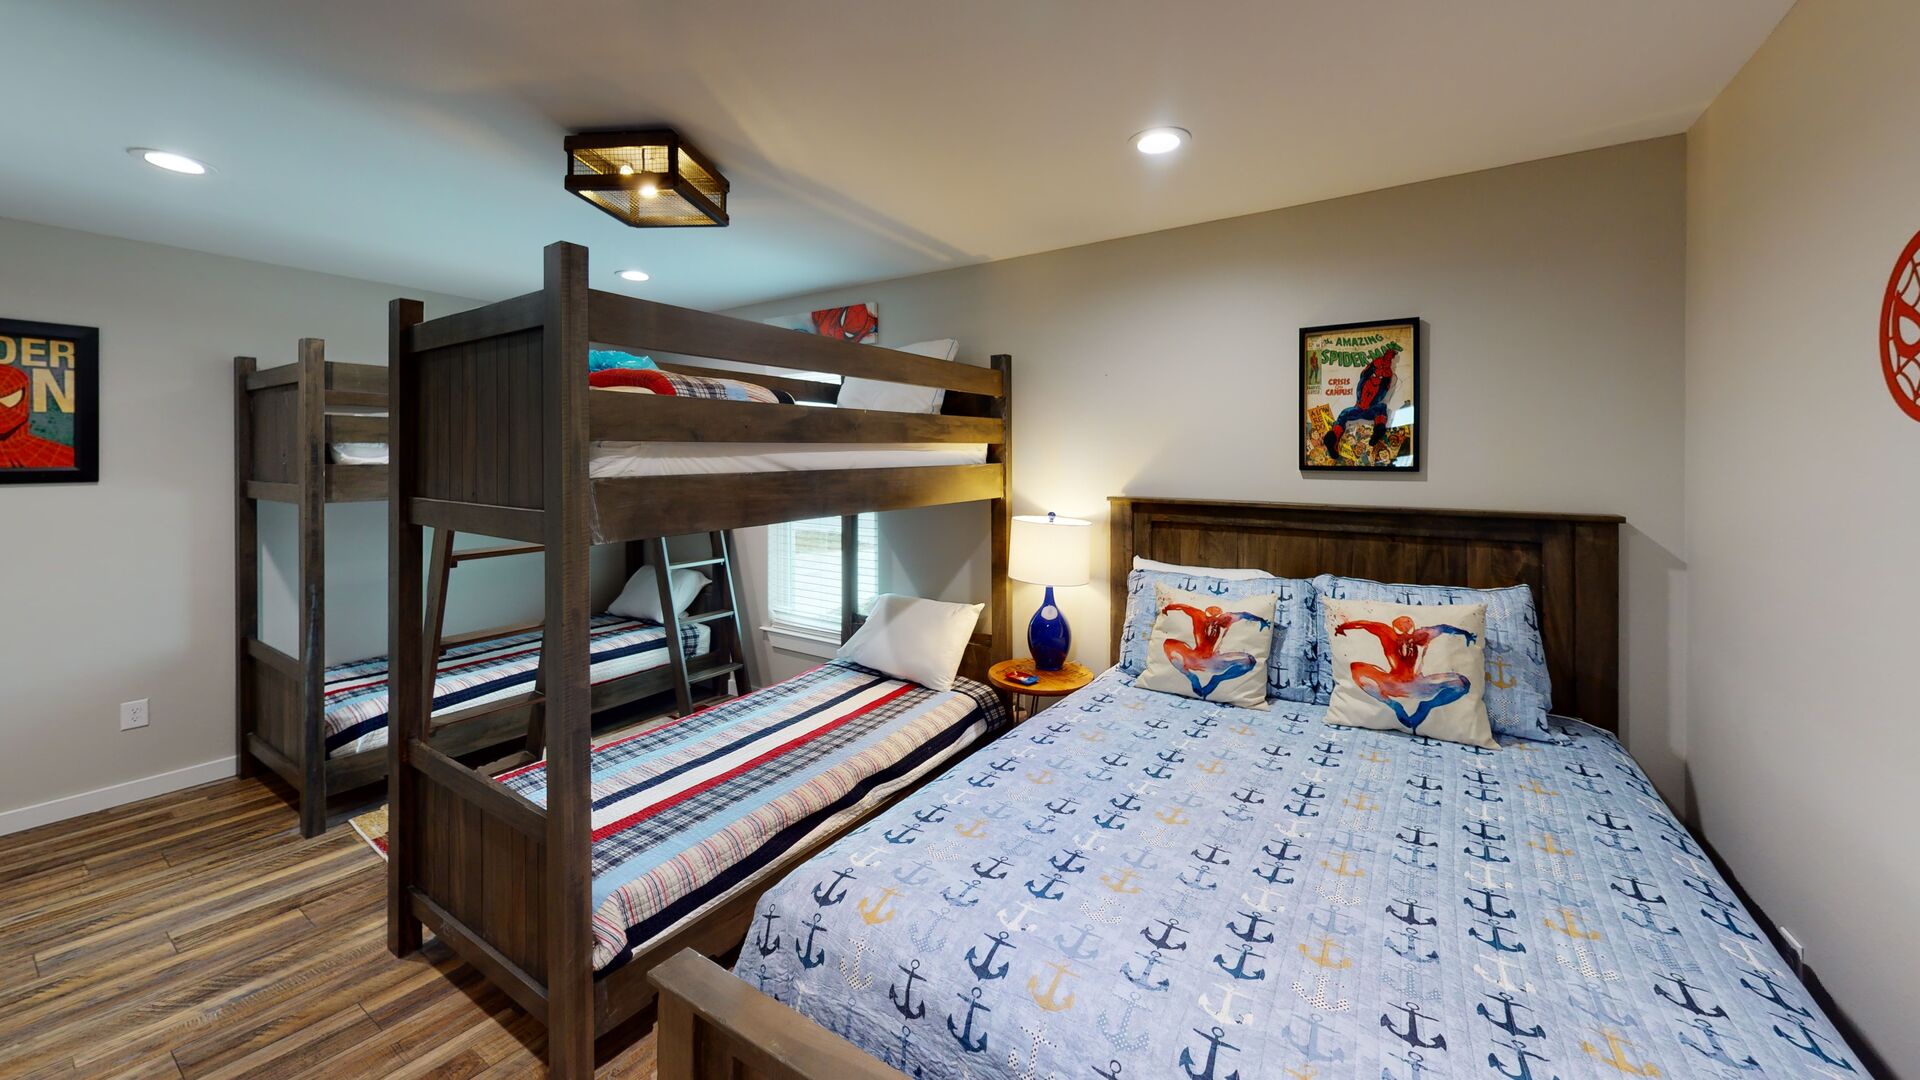 Bedroom #4 or "the bunk room" contains 2 twin bunks and a queen bed. The room is located on the 1st floor